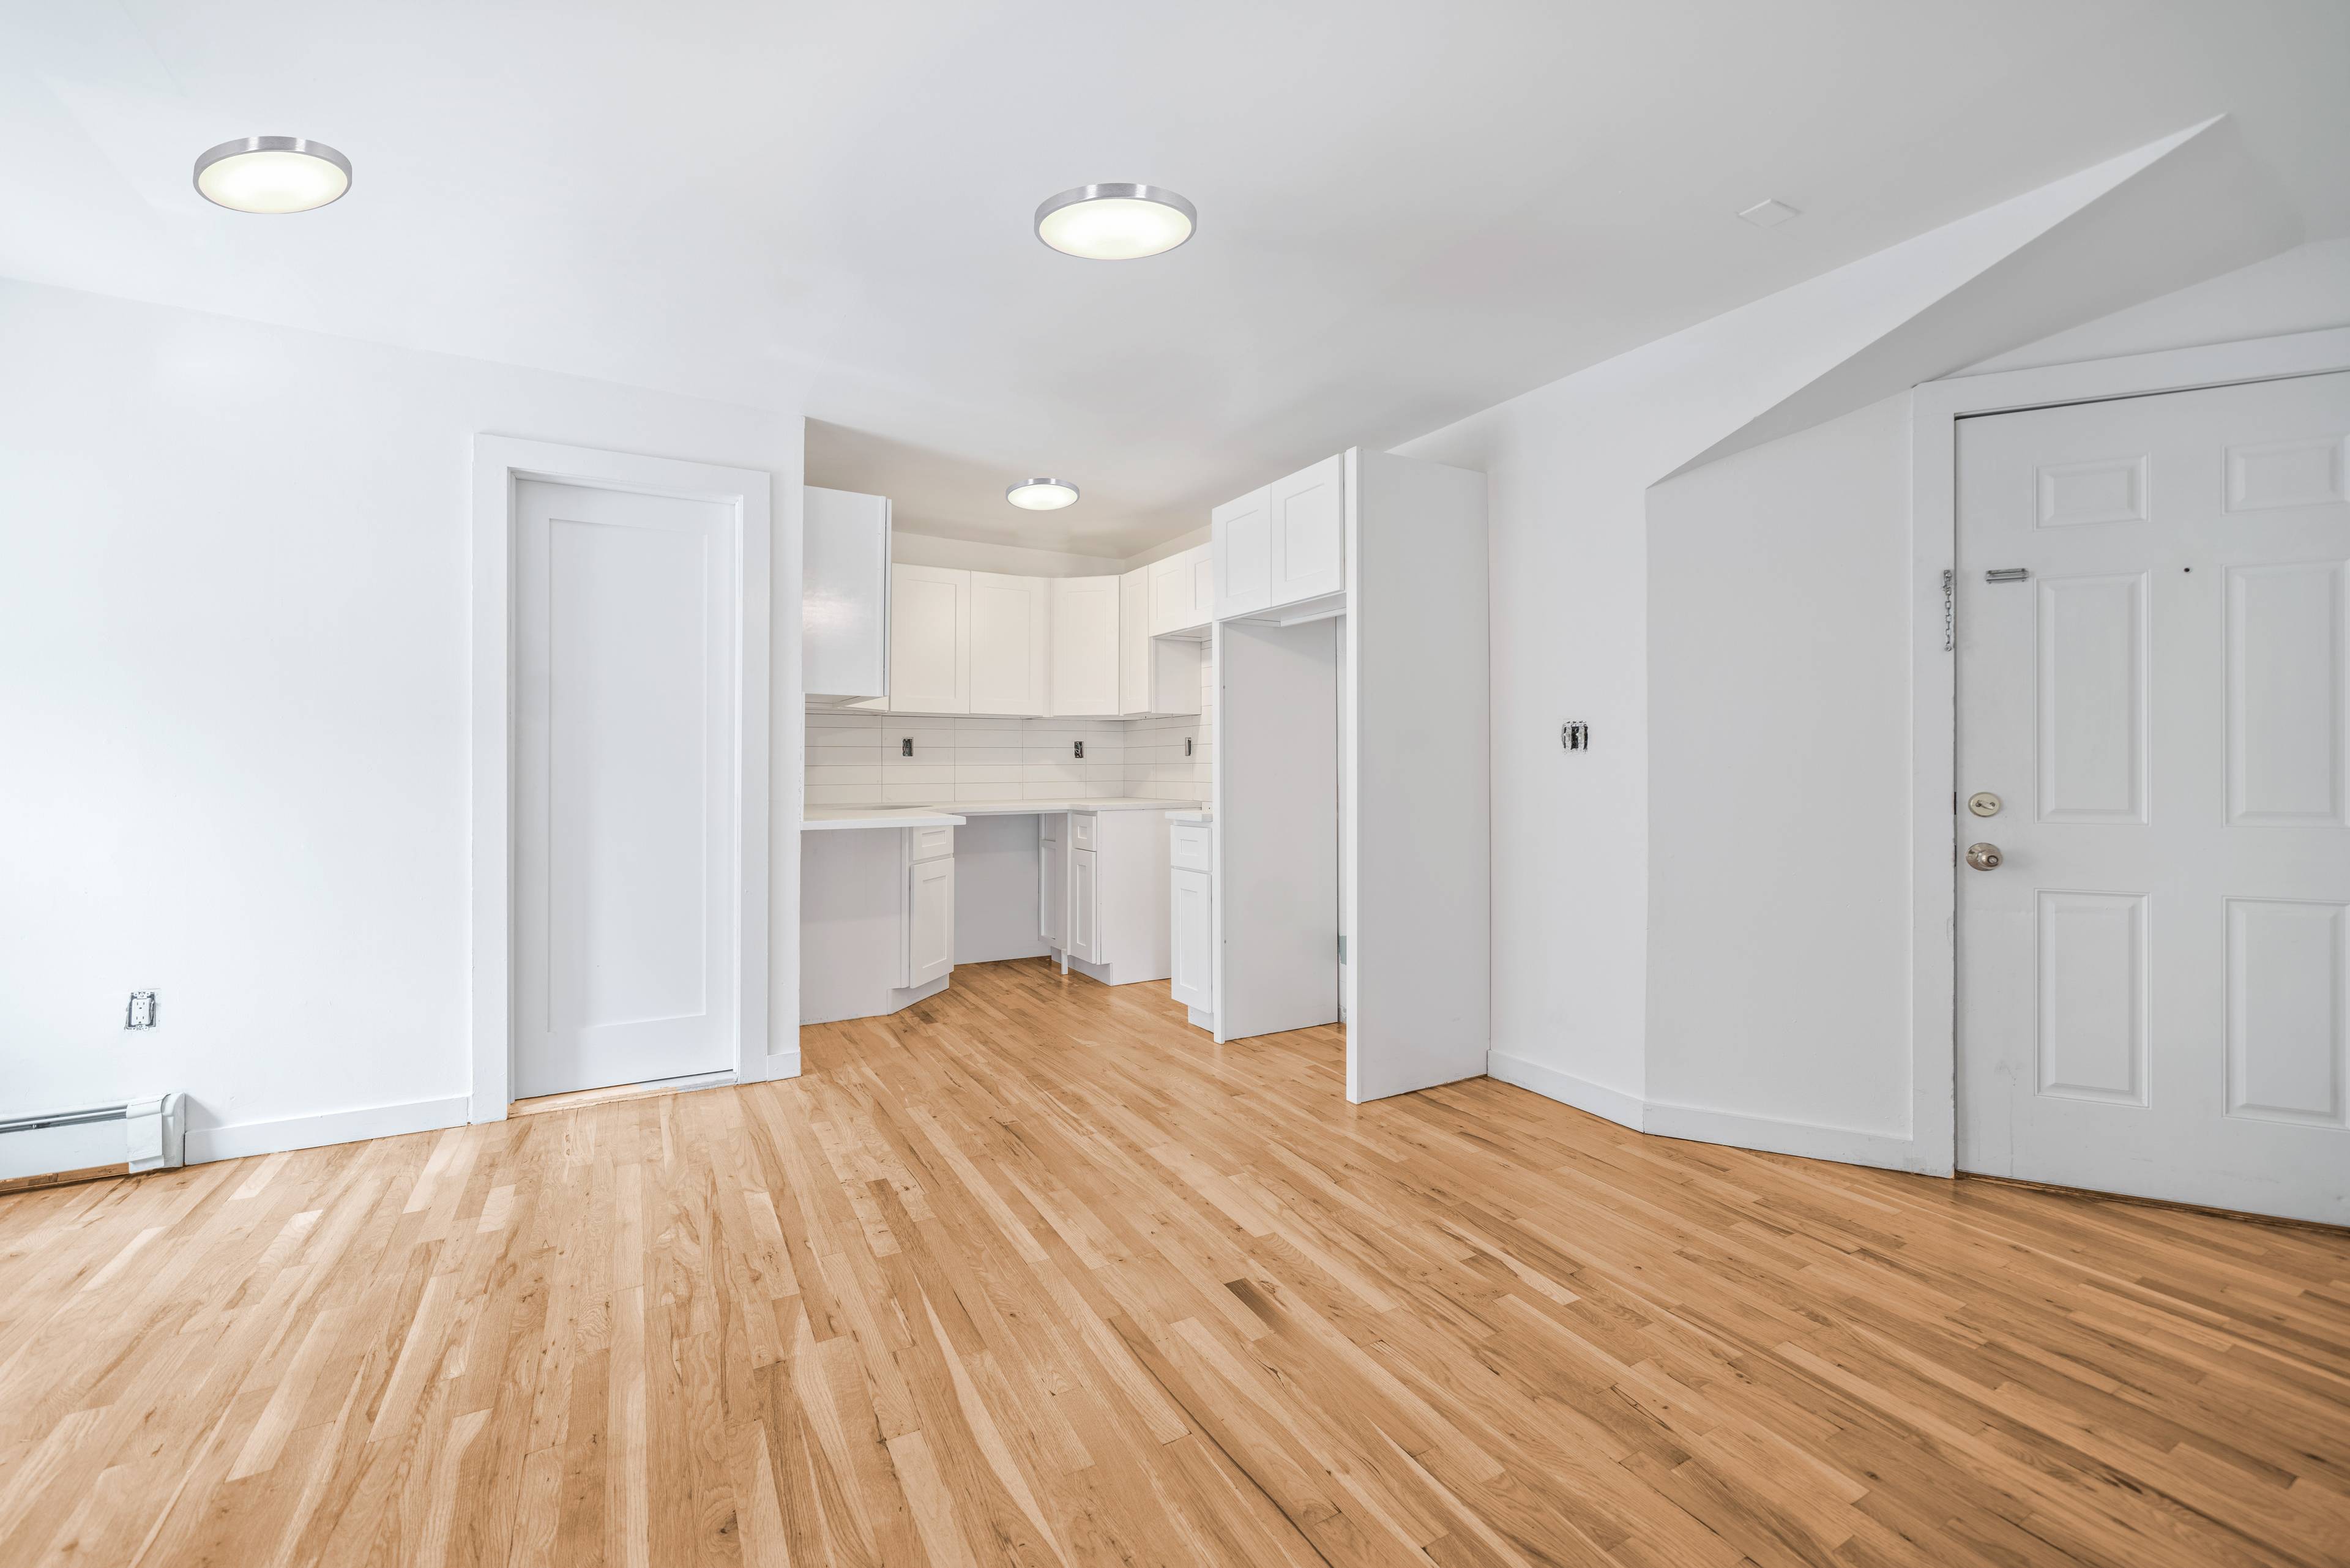 Newly Renovated 2 Bedroom 1 Bath Apartment located at 500 Monroe Street in Hoboken, NJ, Washer/Dyrer In Unit!